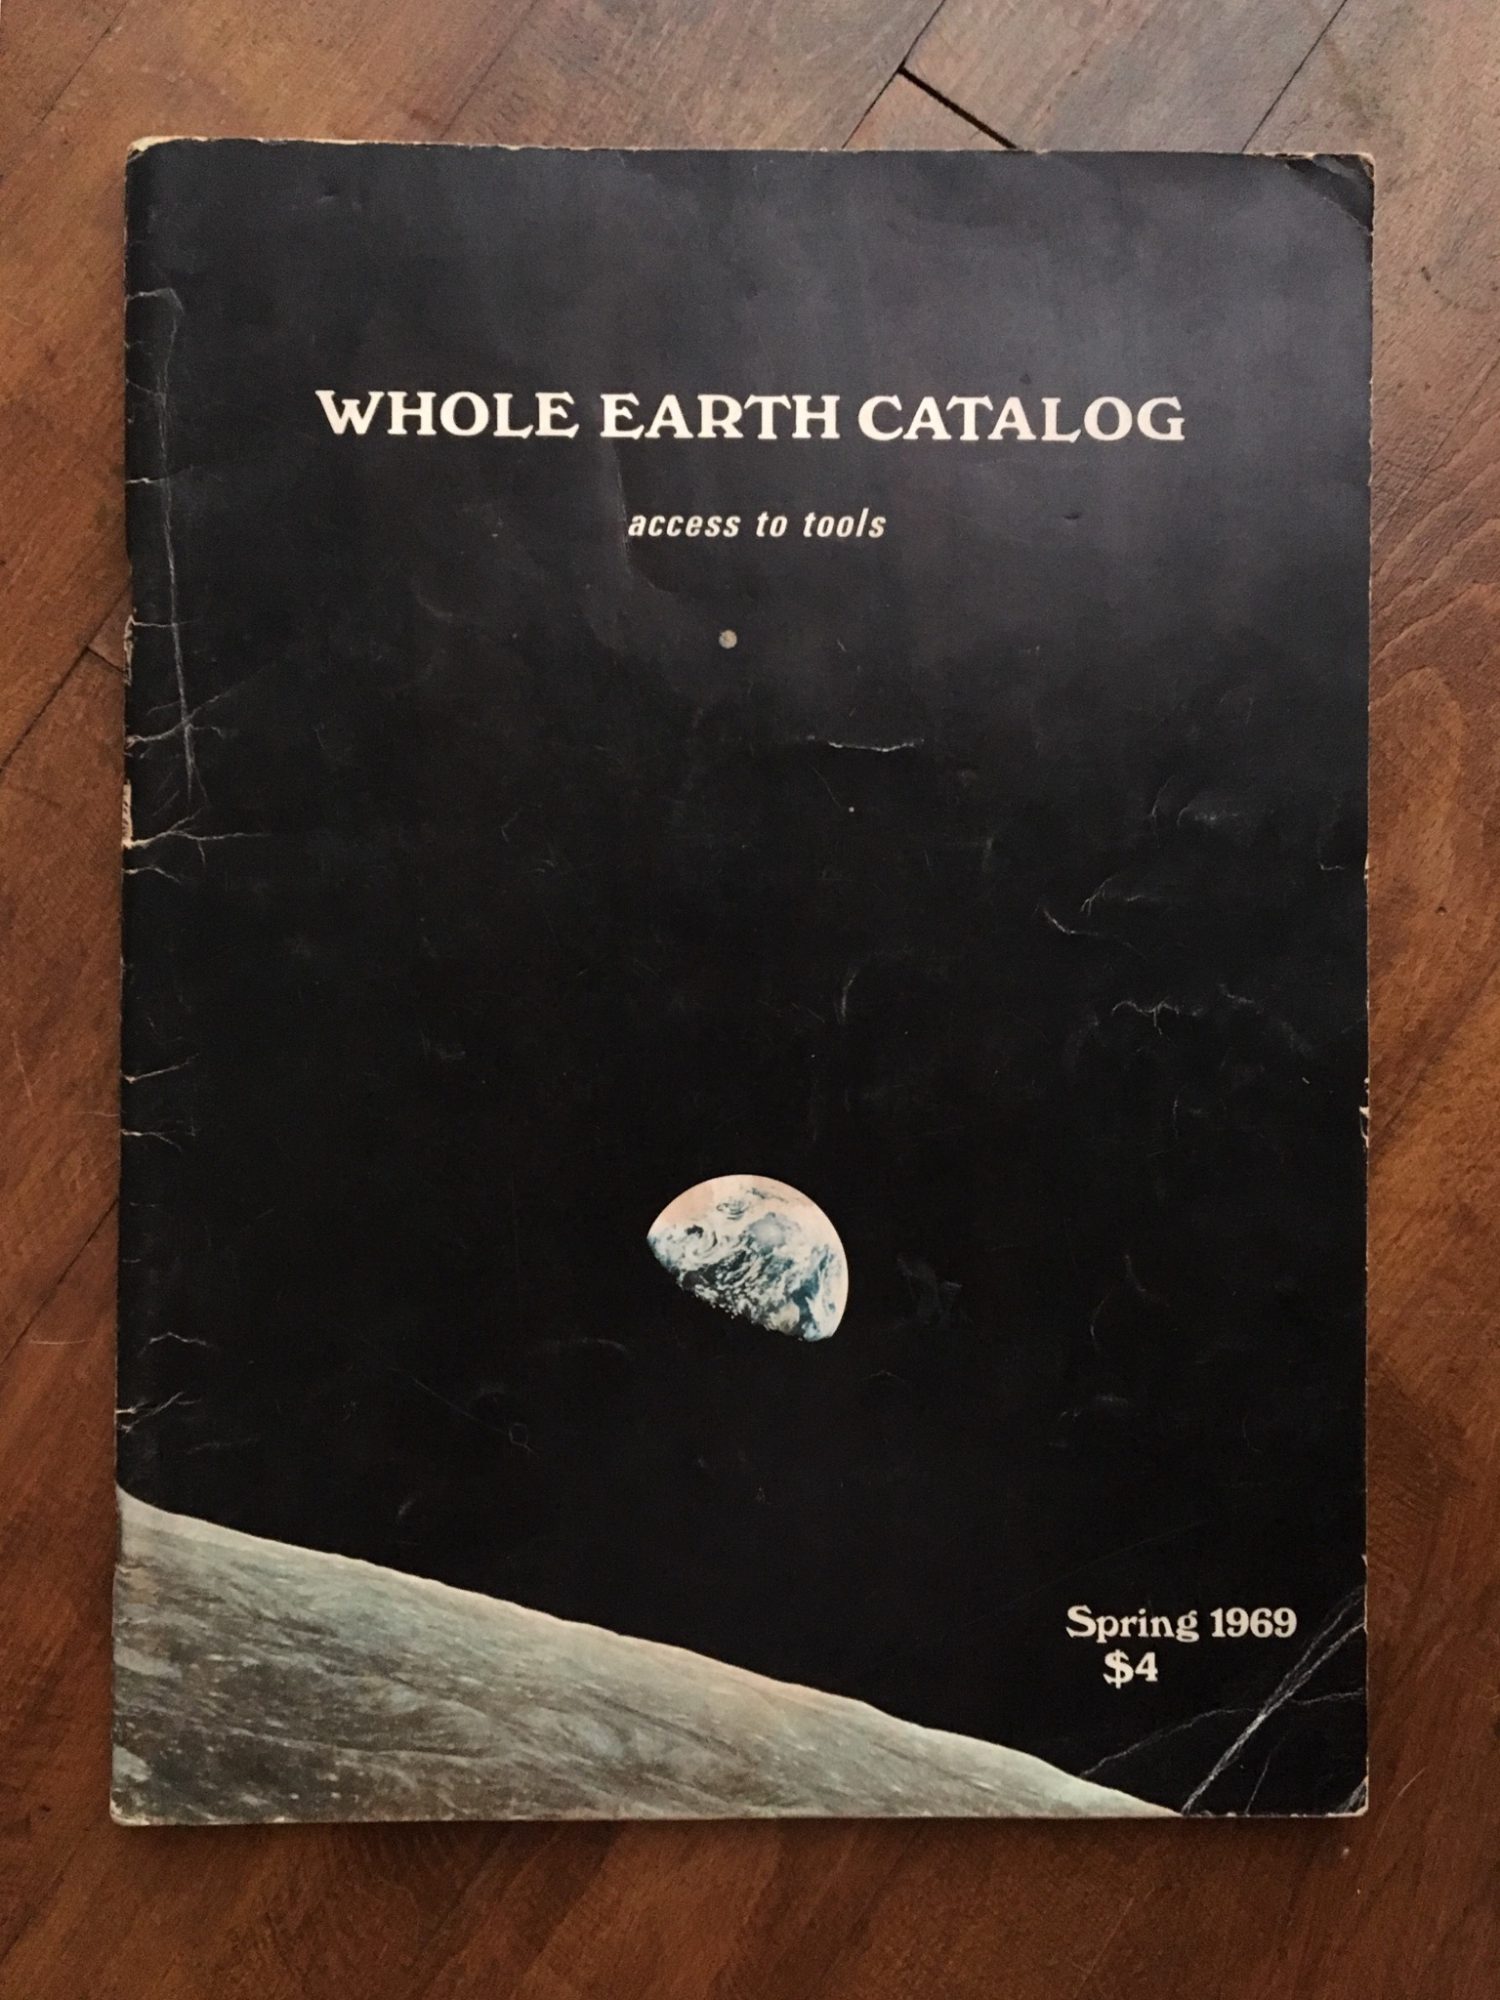 WHOLE EARTH CATALOGって知ってる？ | Container